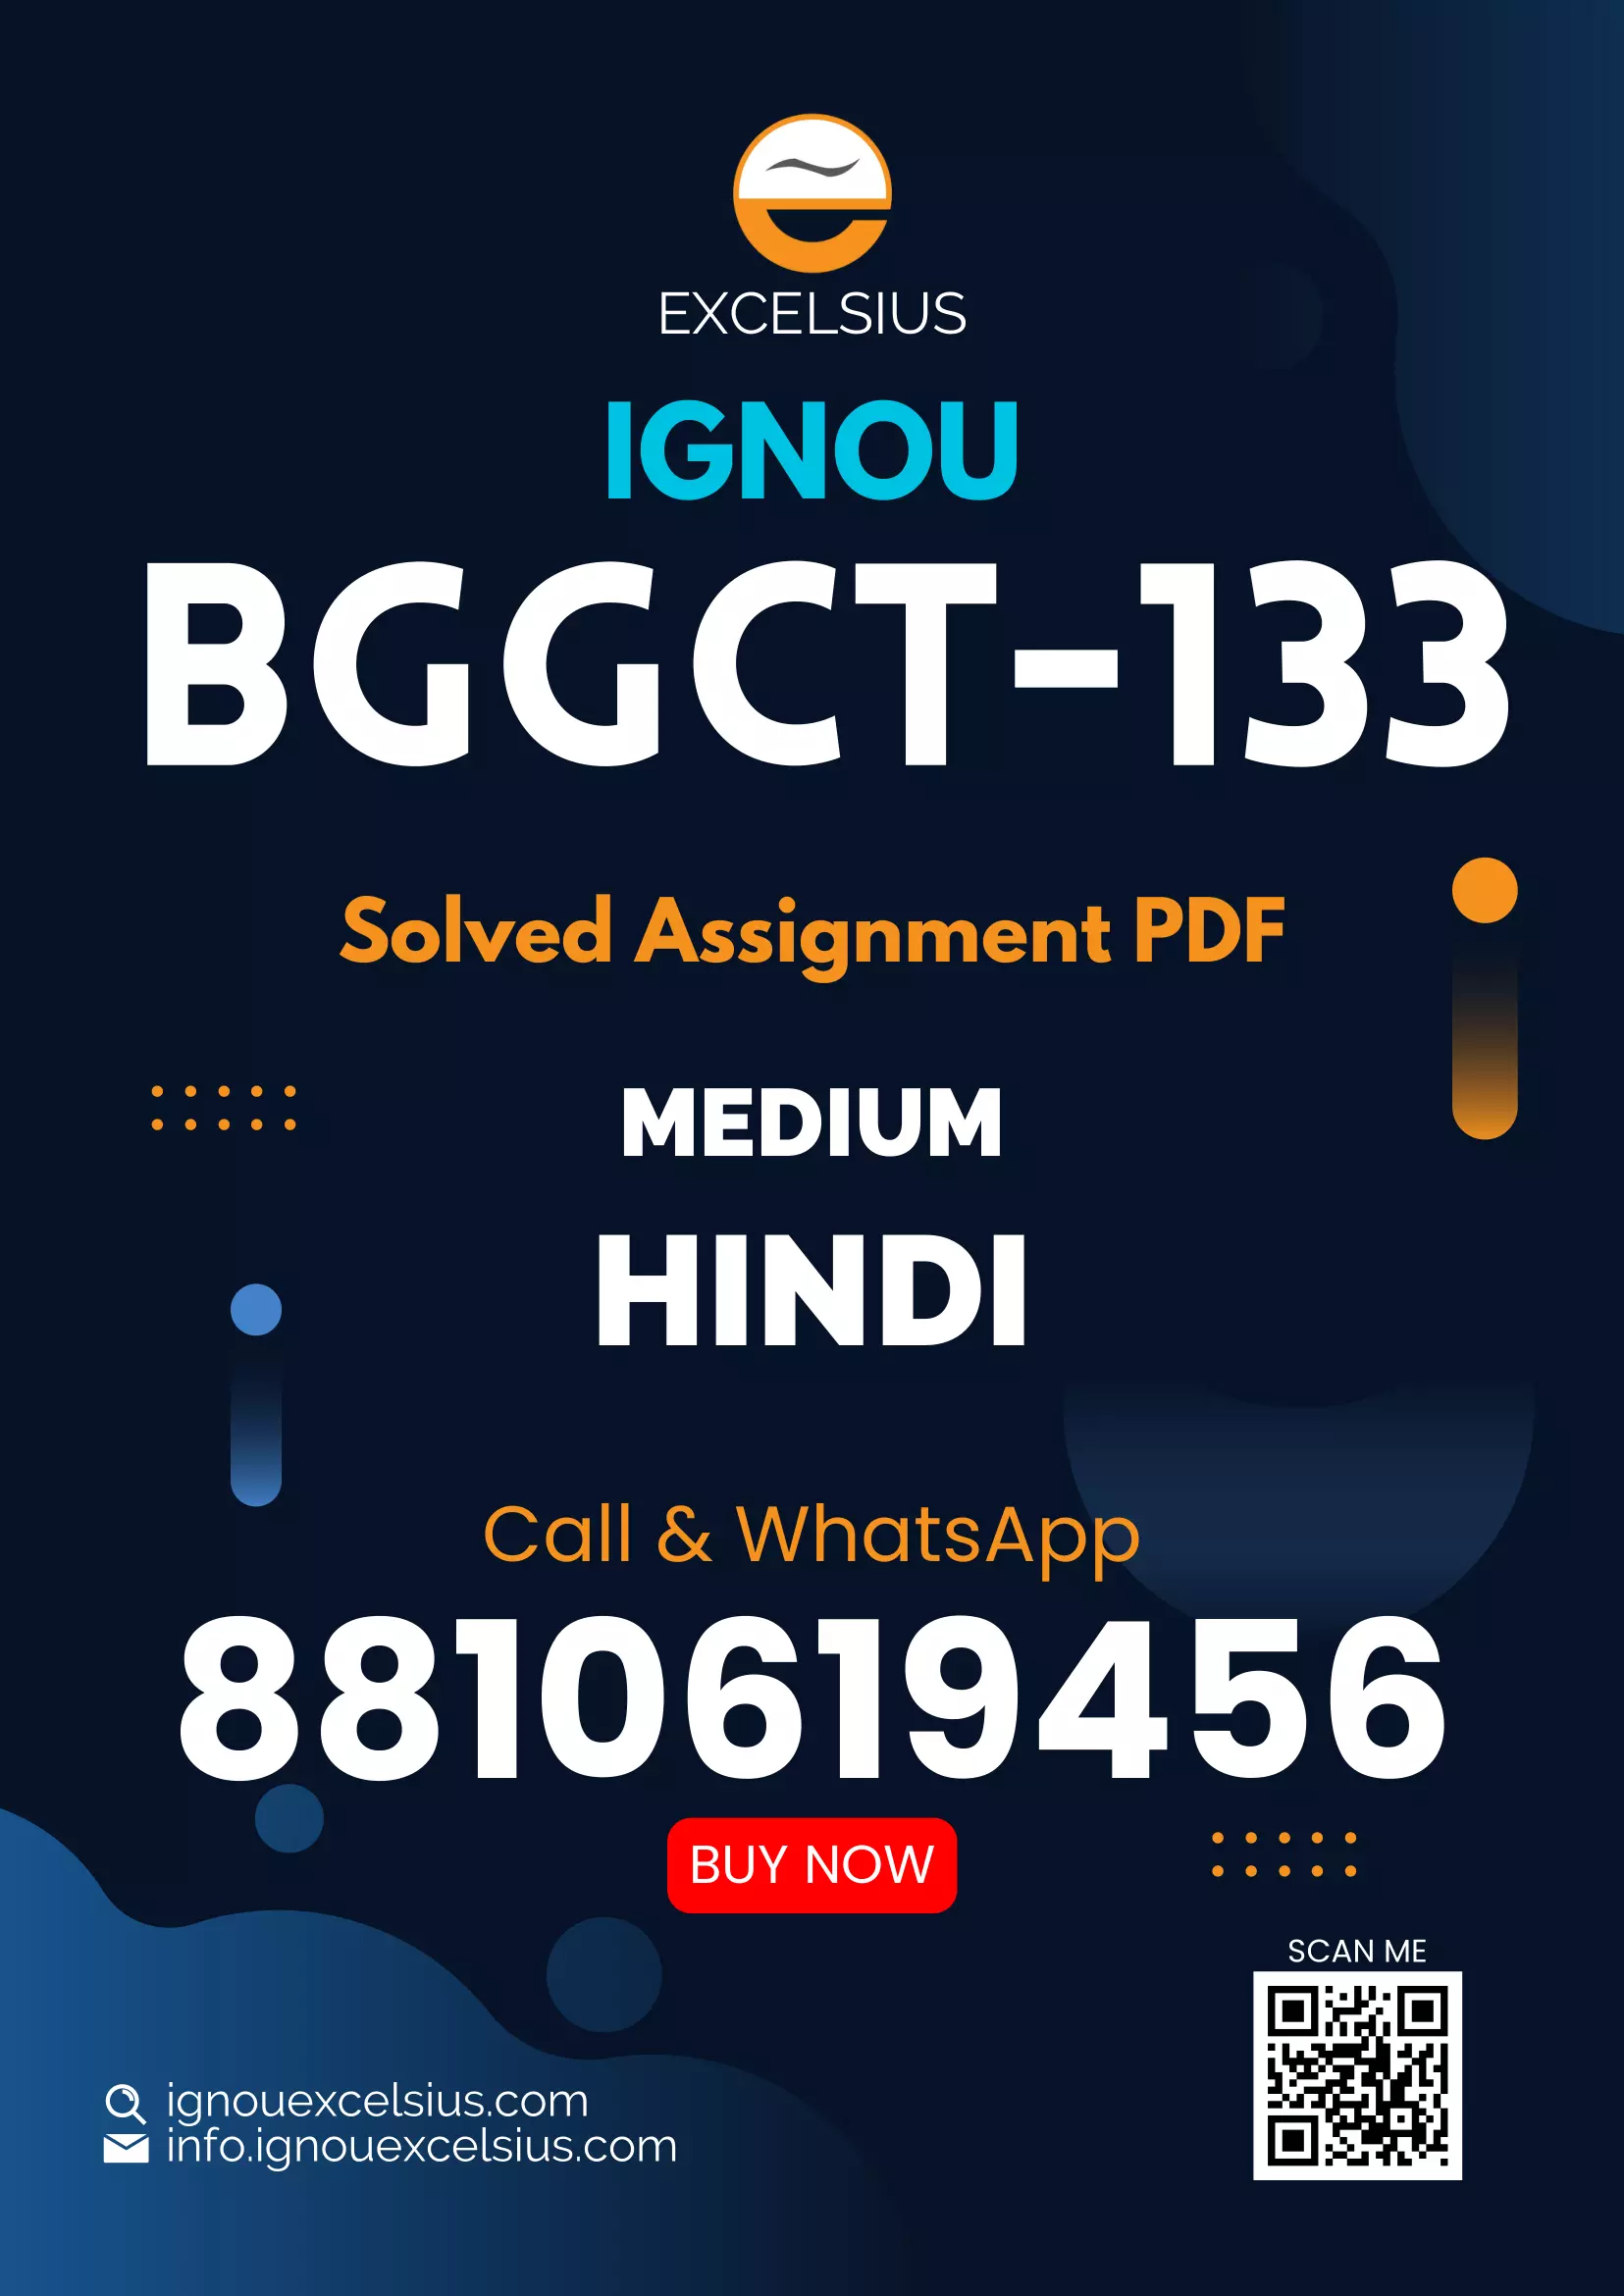 IGNOU BGGCT-133 - General Cartography, Latest Solved Assignment-January 2023 - December 2023